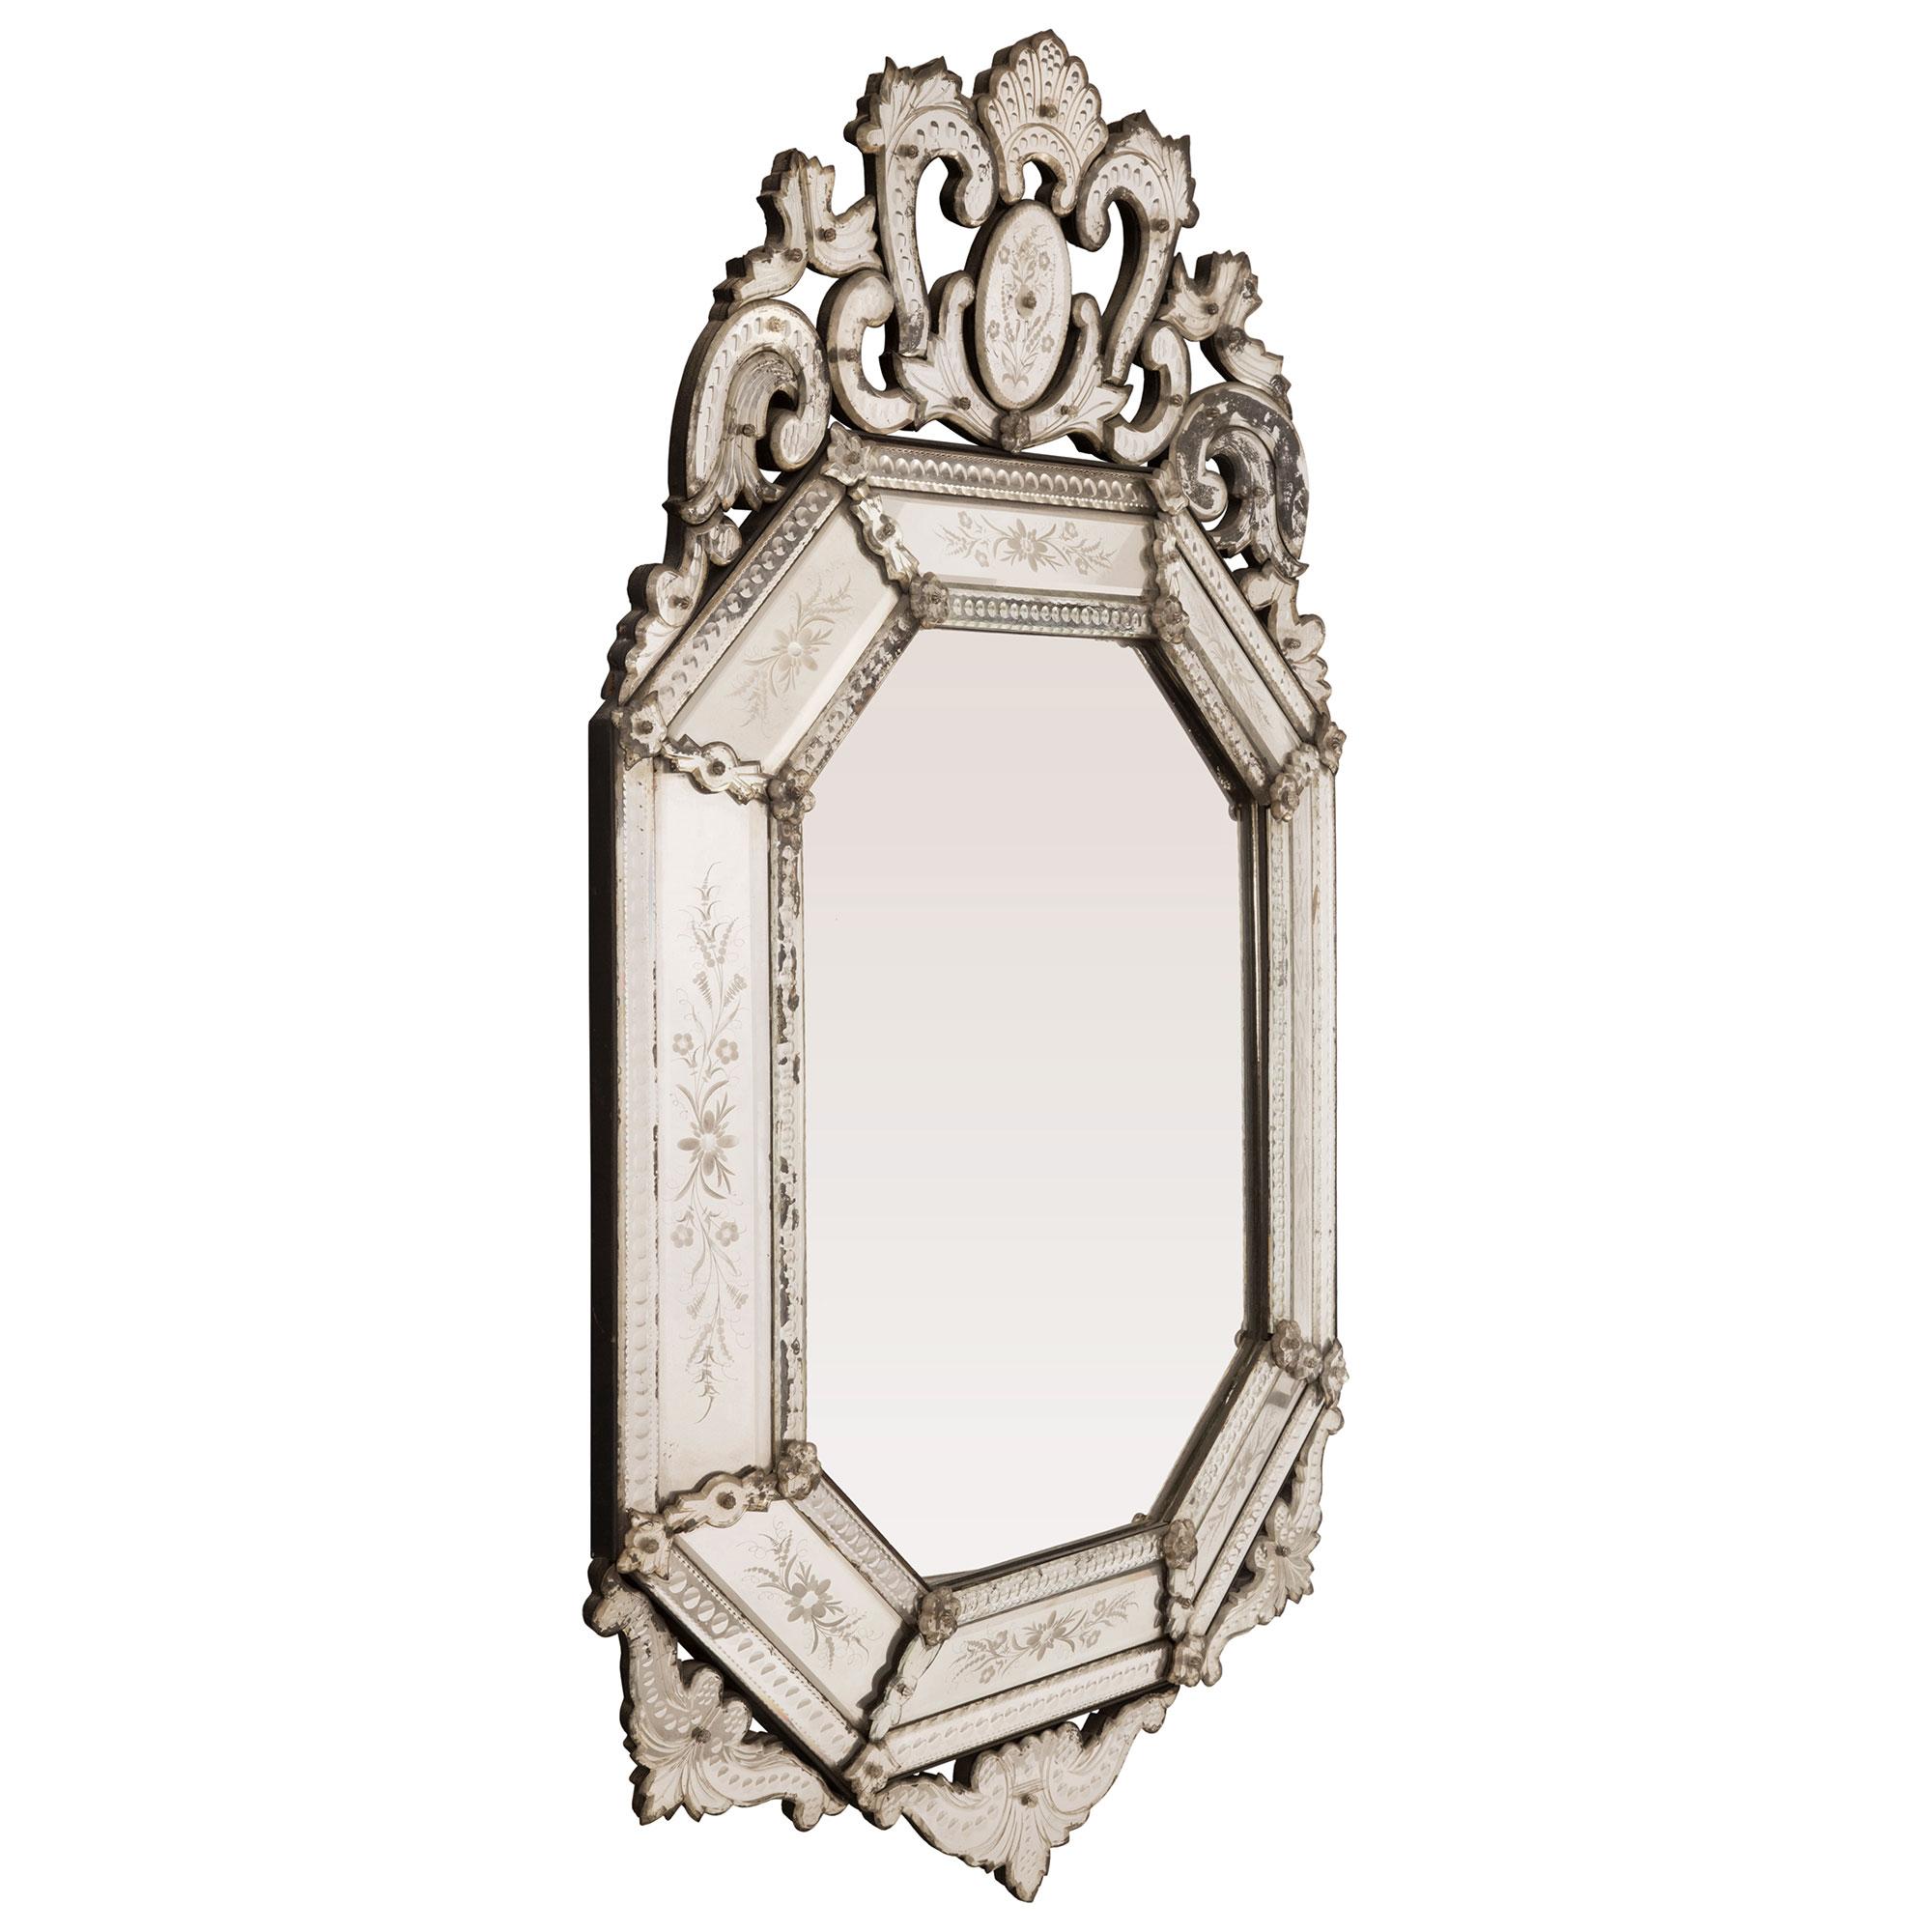 A stunning Italian turn of century Venetian st. double-framed mirror. The octagonal-shaped mirror retains all of its original mirror plates throughout with the central mirror plate framed within a lovely beaded design. The outer mirror plates